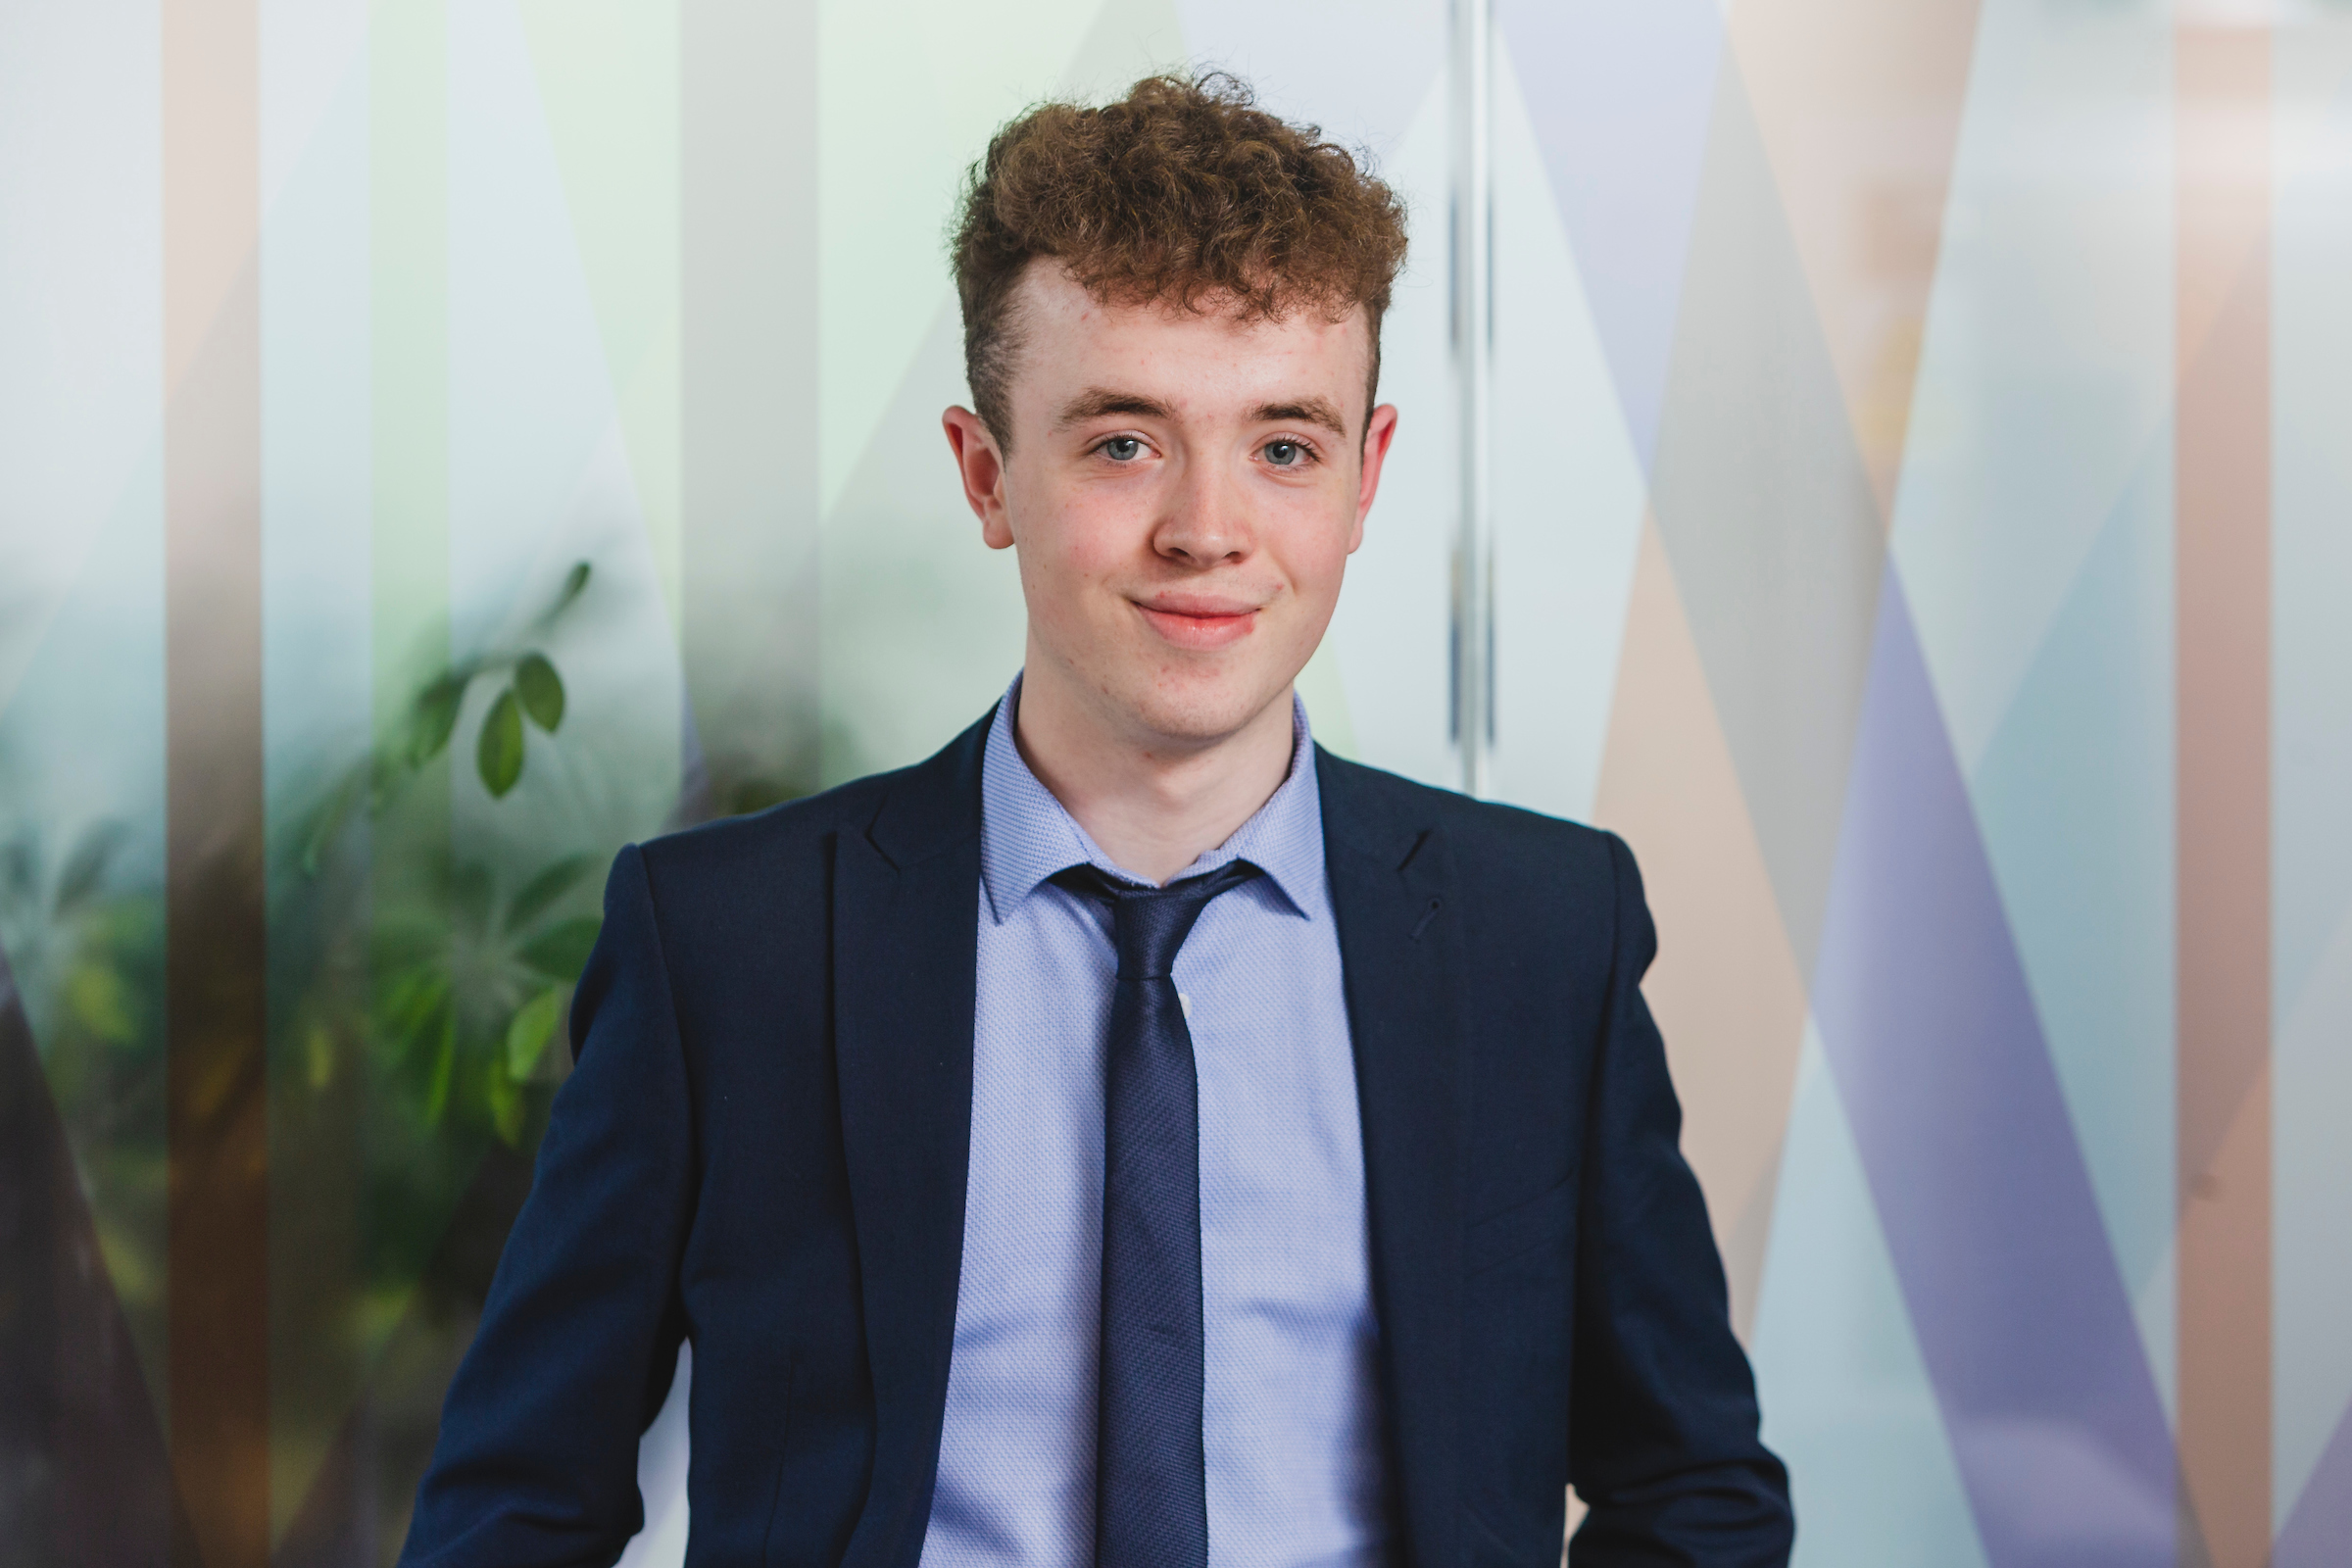 Acumen Financial Planning trainee becomes youngest in Scotland to receive Diploma in Financial Planning exams